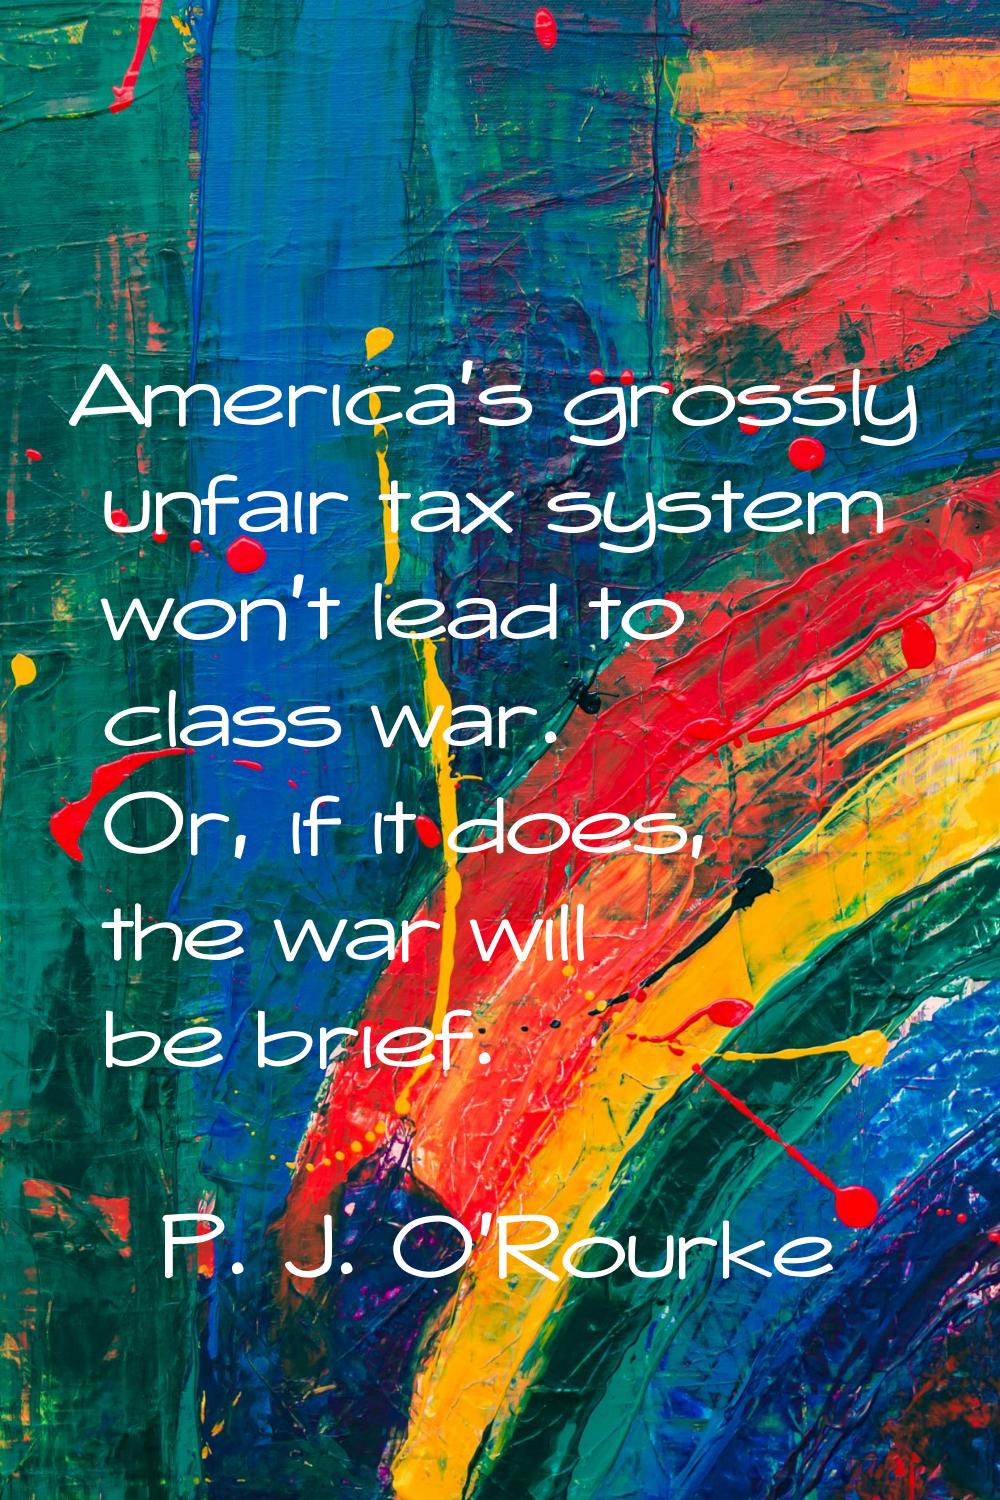 America's grossly unfair tax system won't lead to class war. Or, if it does, the war will be brief.